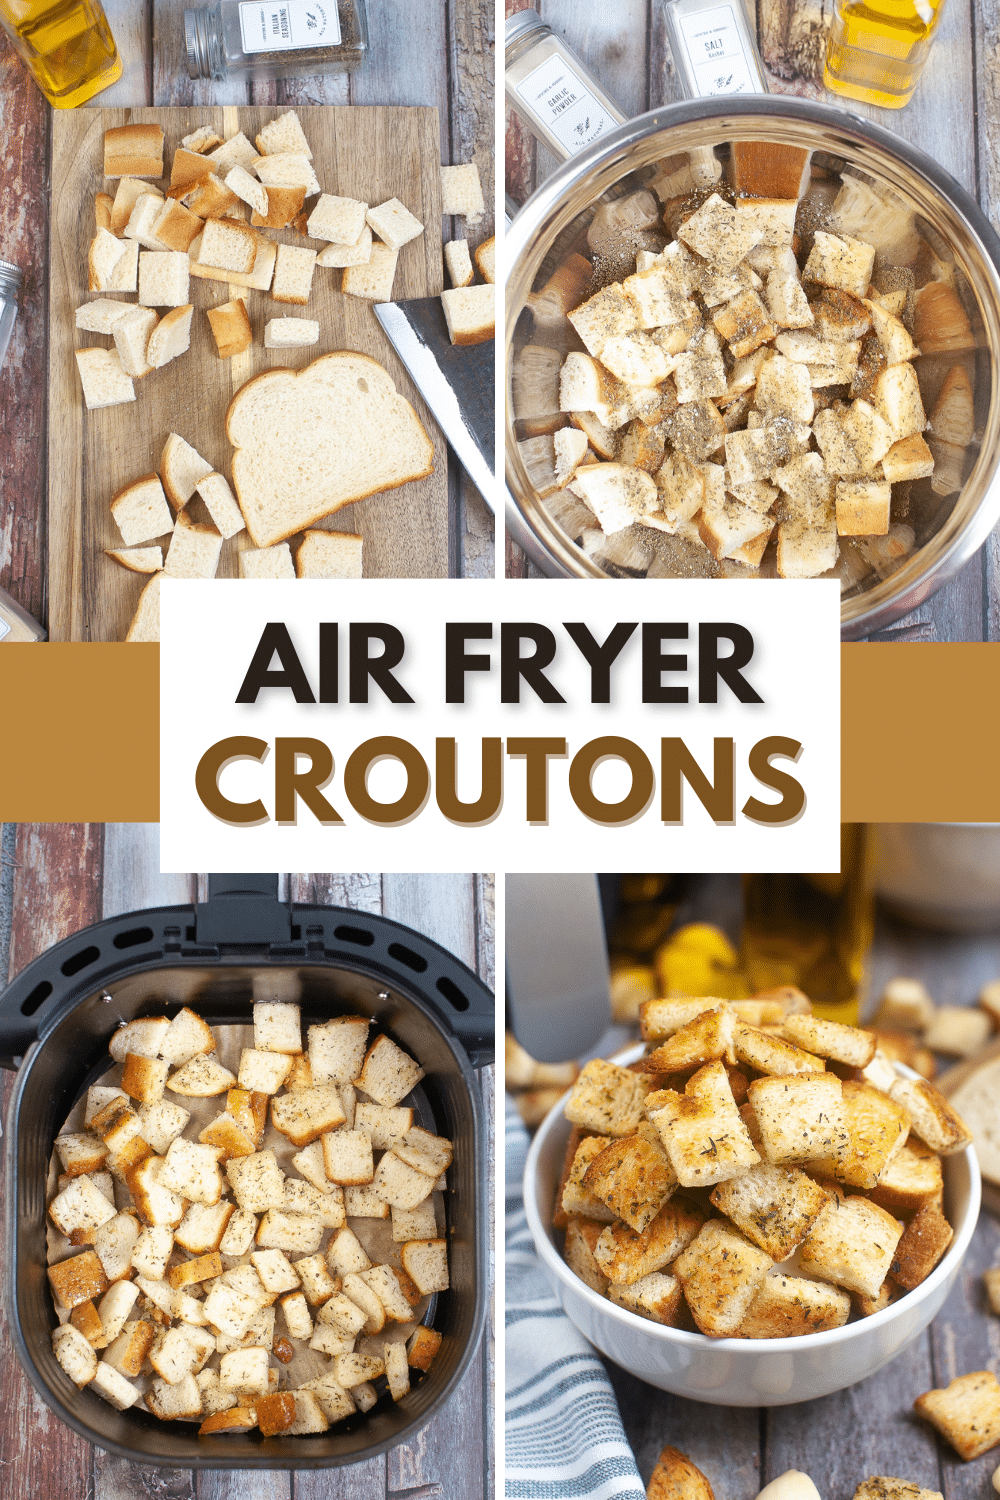 These Air Fryer Croutons are the perfect way to add crunch and flavor to salads, soups and casseroles. They're healthier than fried versions. #airfryercroutons #airfryer #croutons via @wondermomwannab